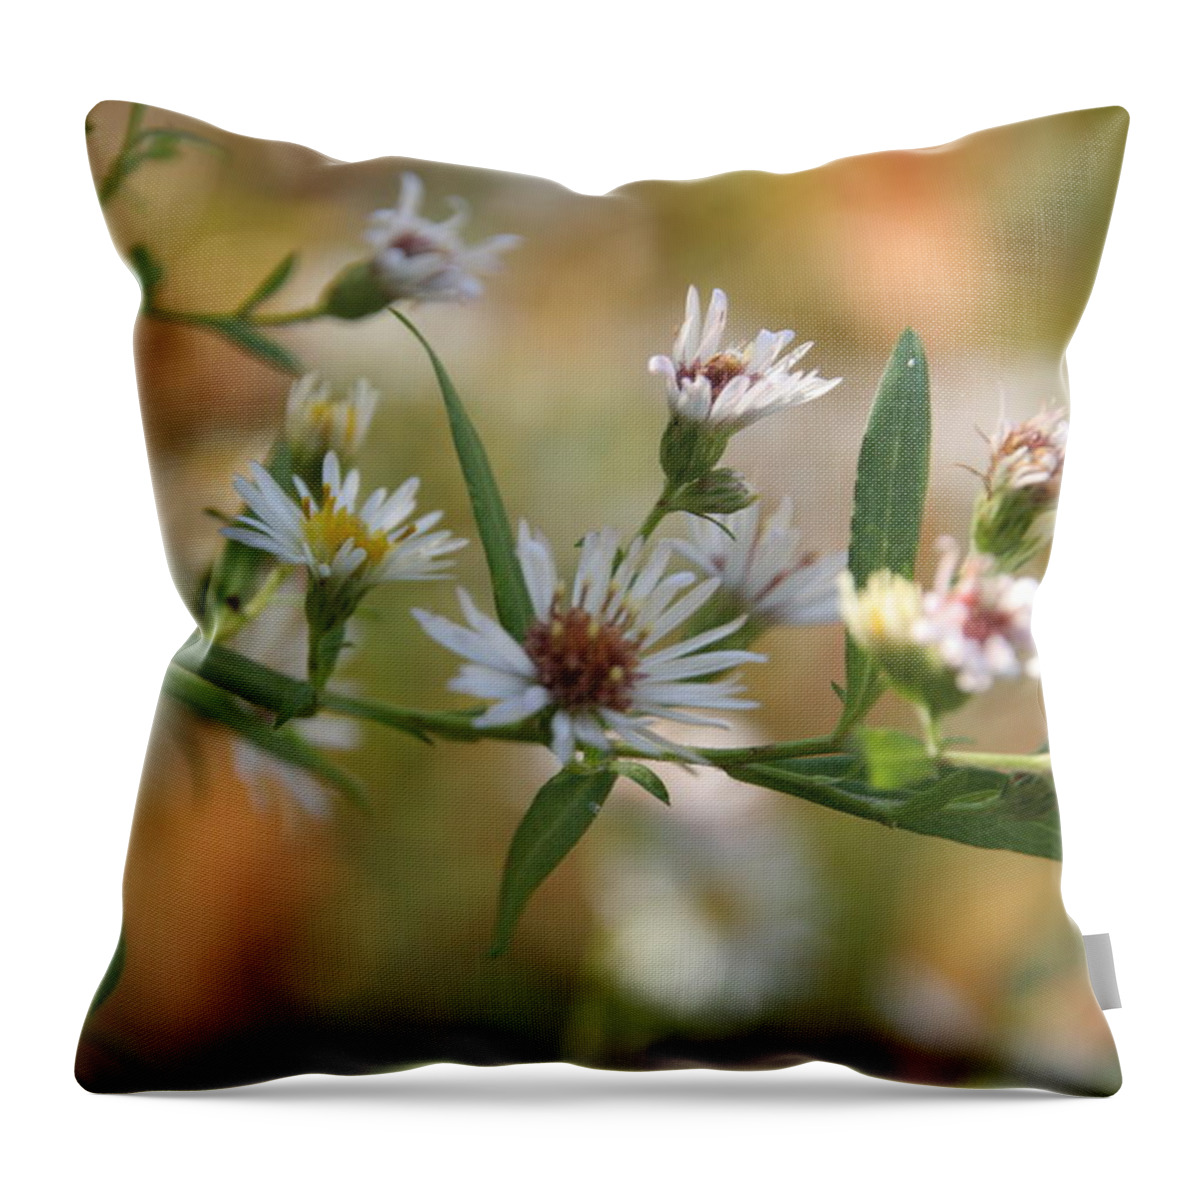 Wild Flower Throw Pillow featuring the photograph Wildflowers by Valerie Collins